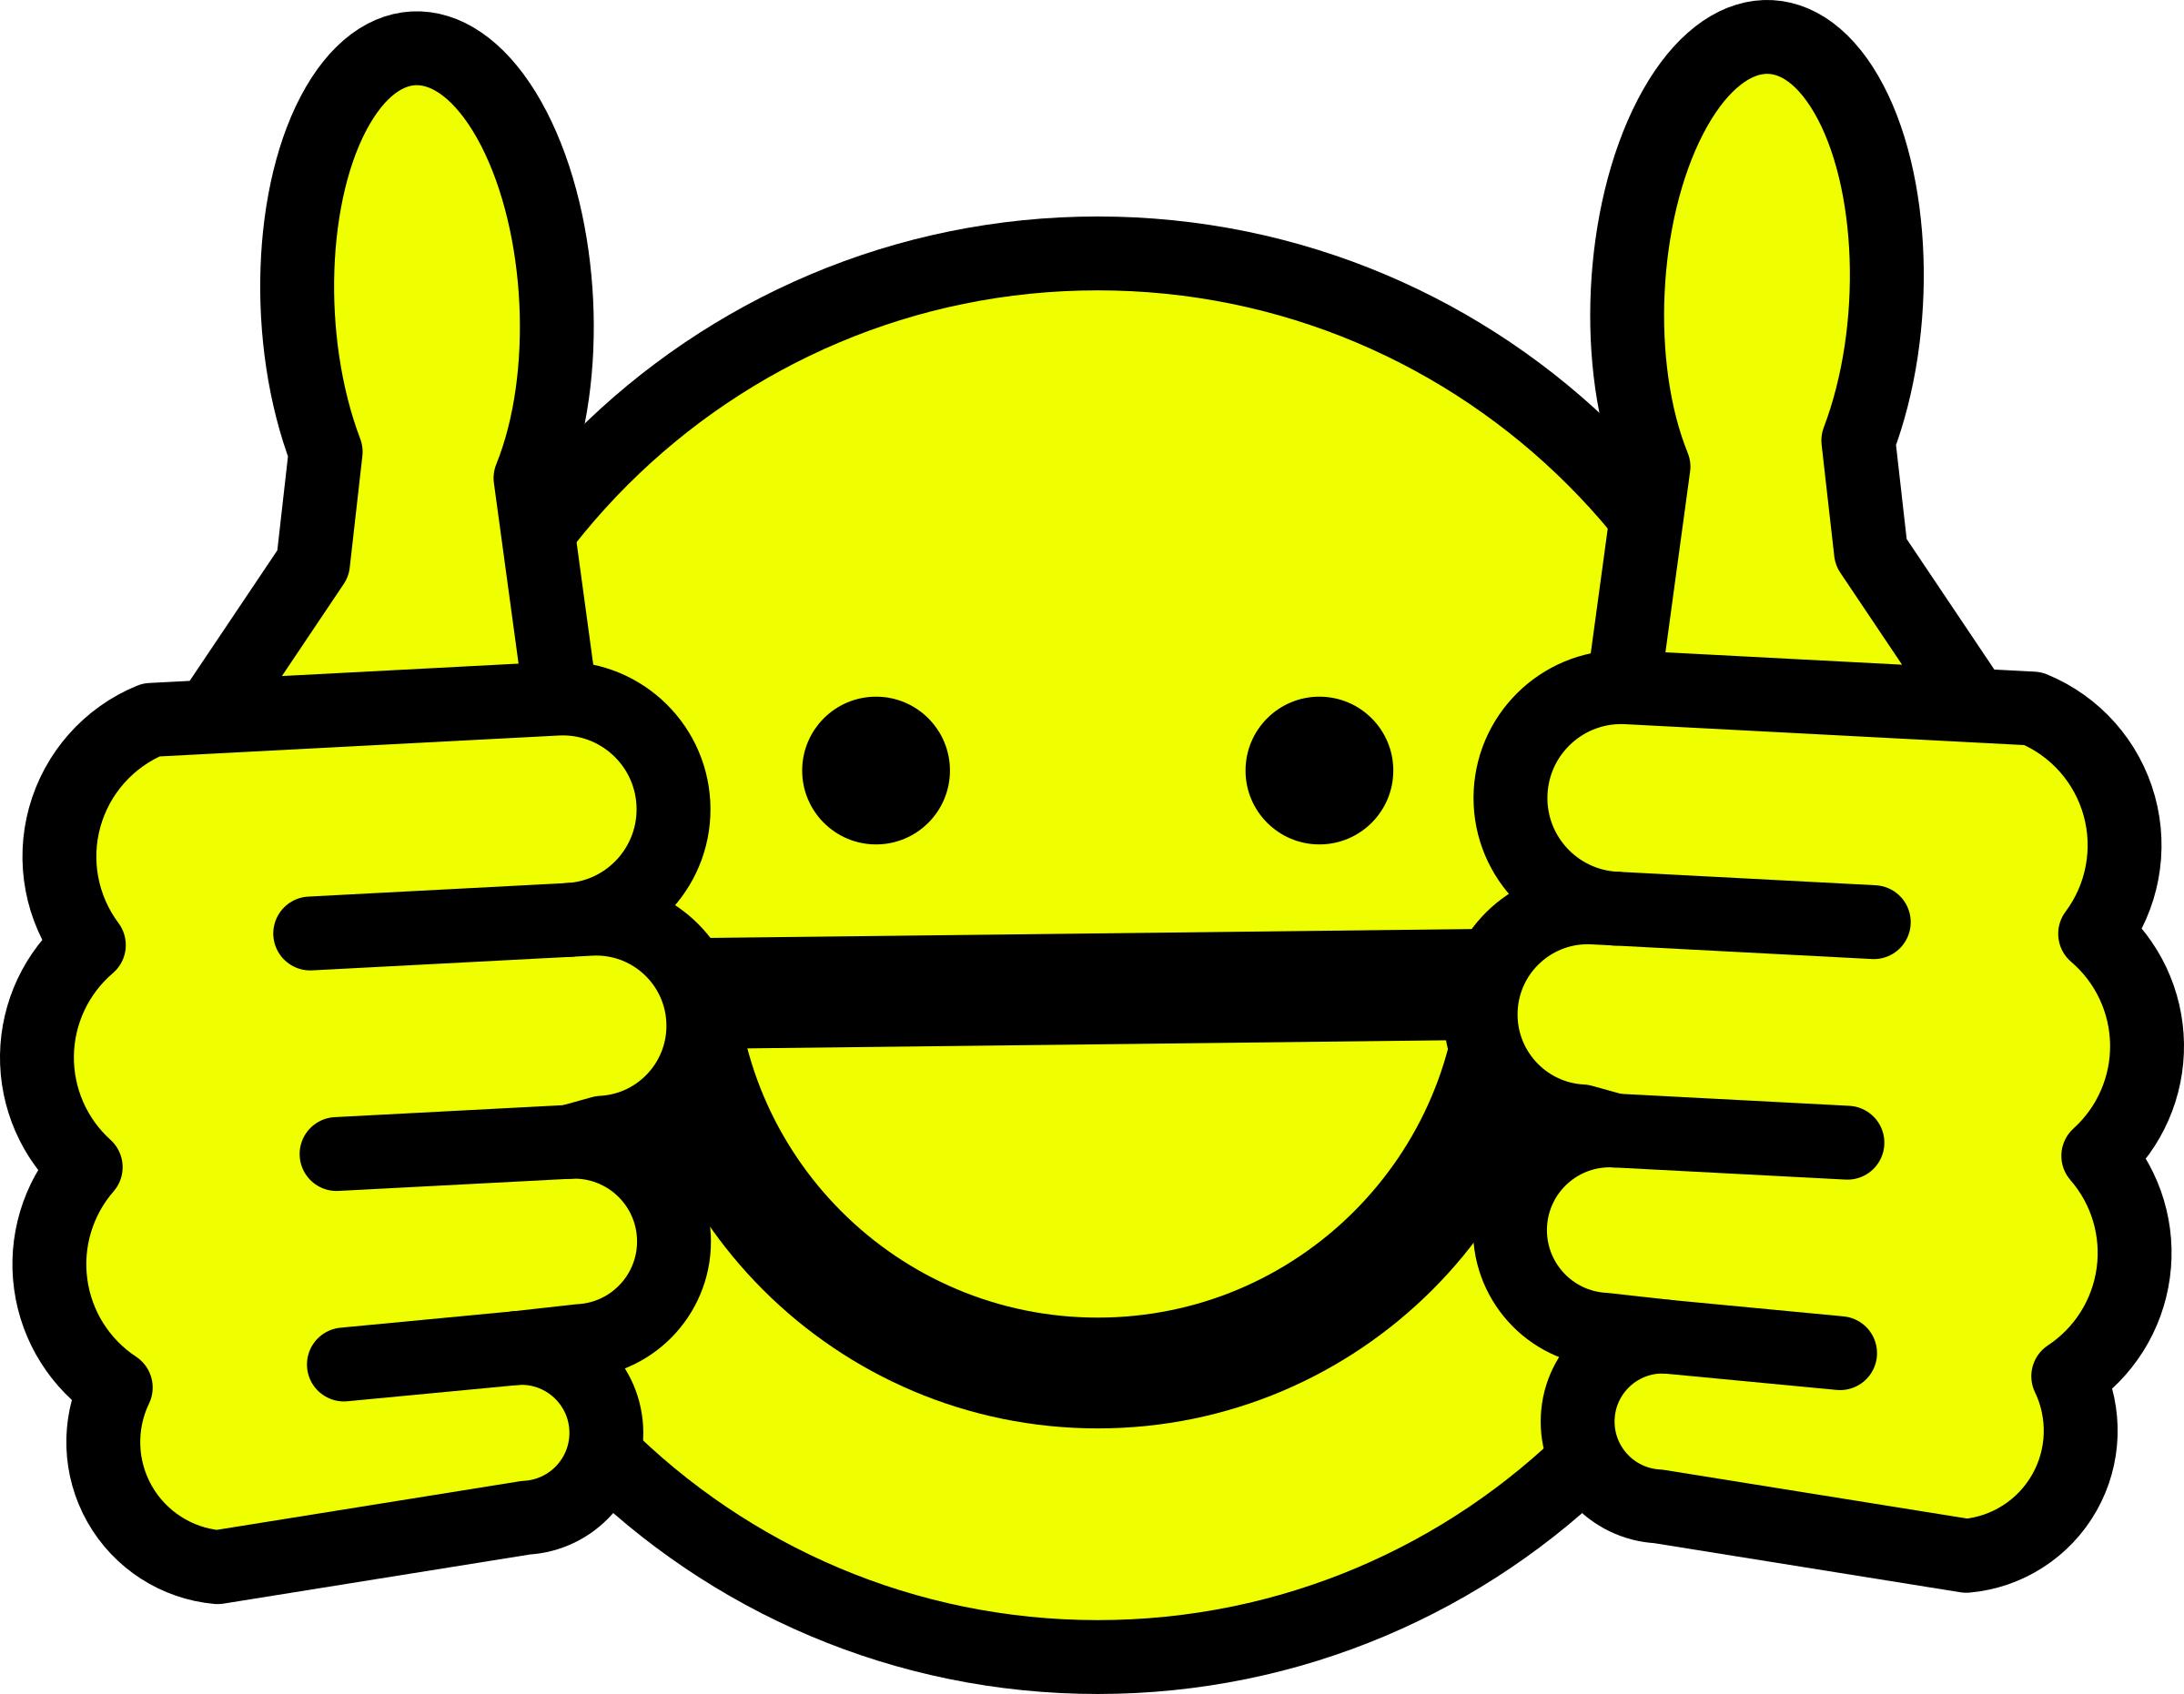 Awesome Face Smiley PNG icons